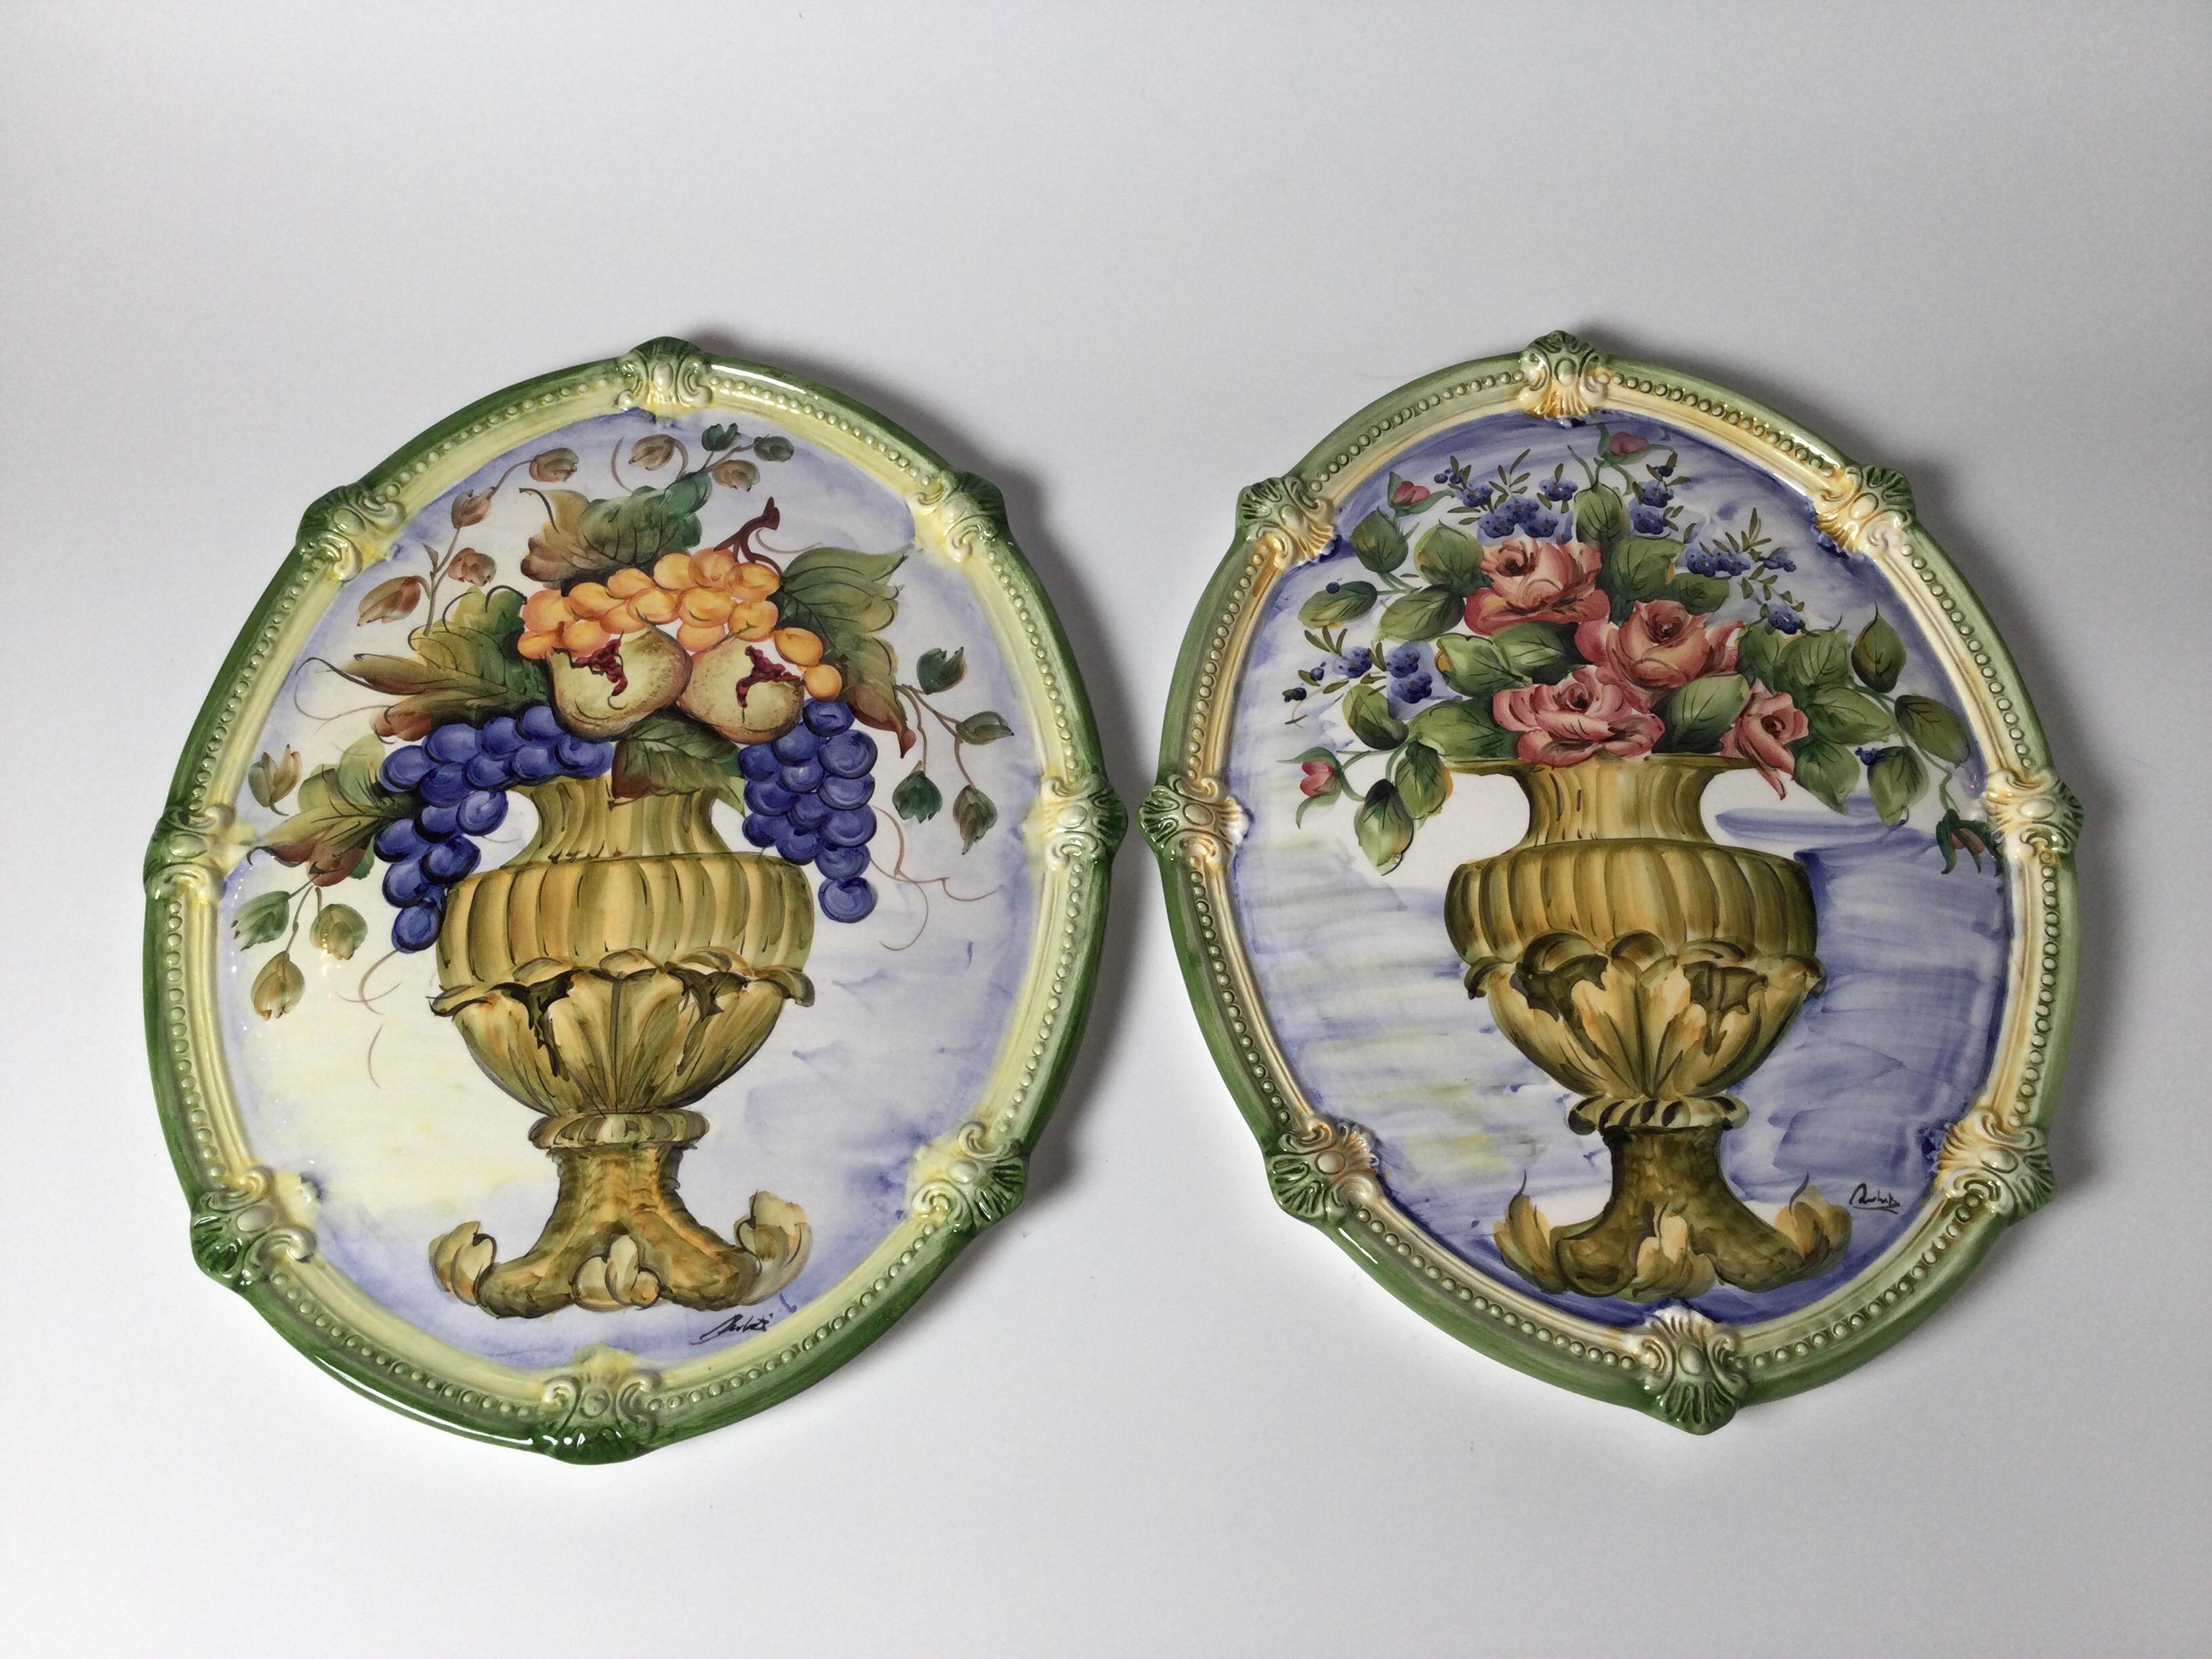 Vibrant pair of hand painted Italian Faience oval wall plaques. The textured borders with central urn and floral decoration. Made in Italy, Late 20th century.